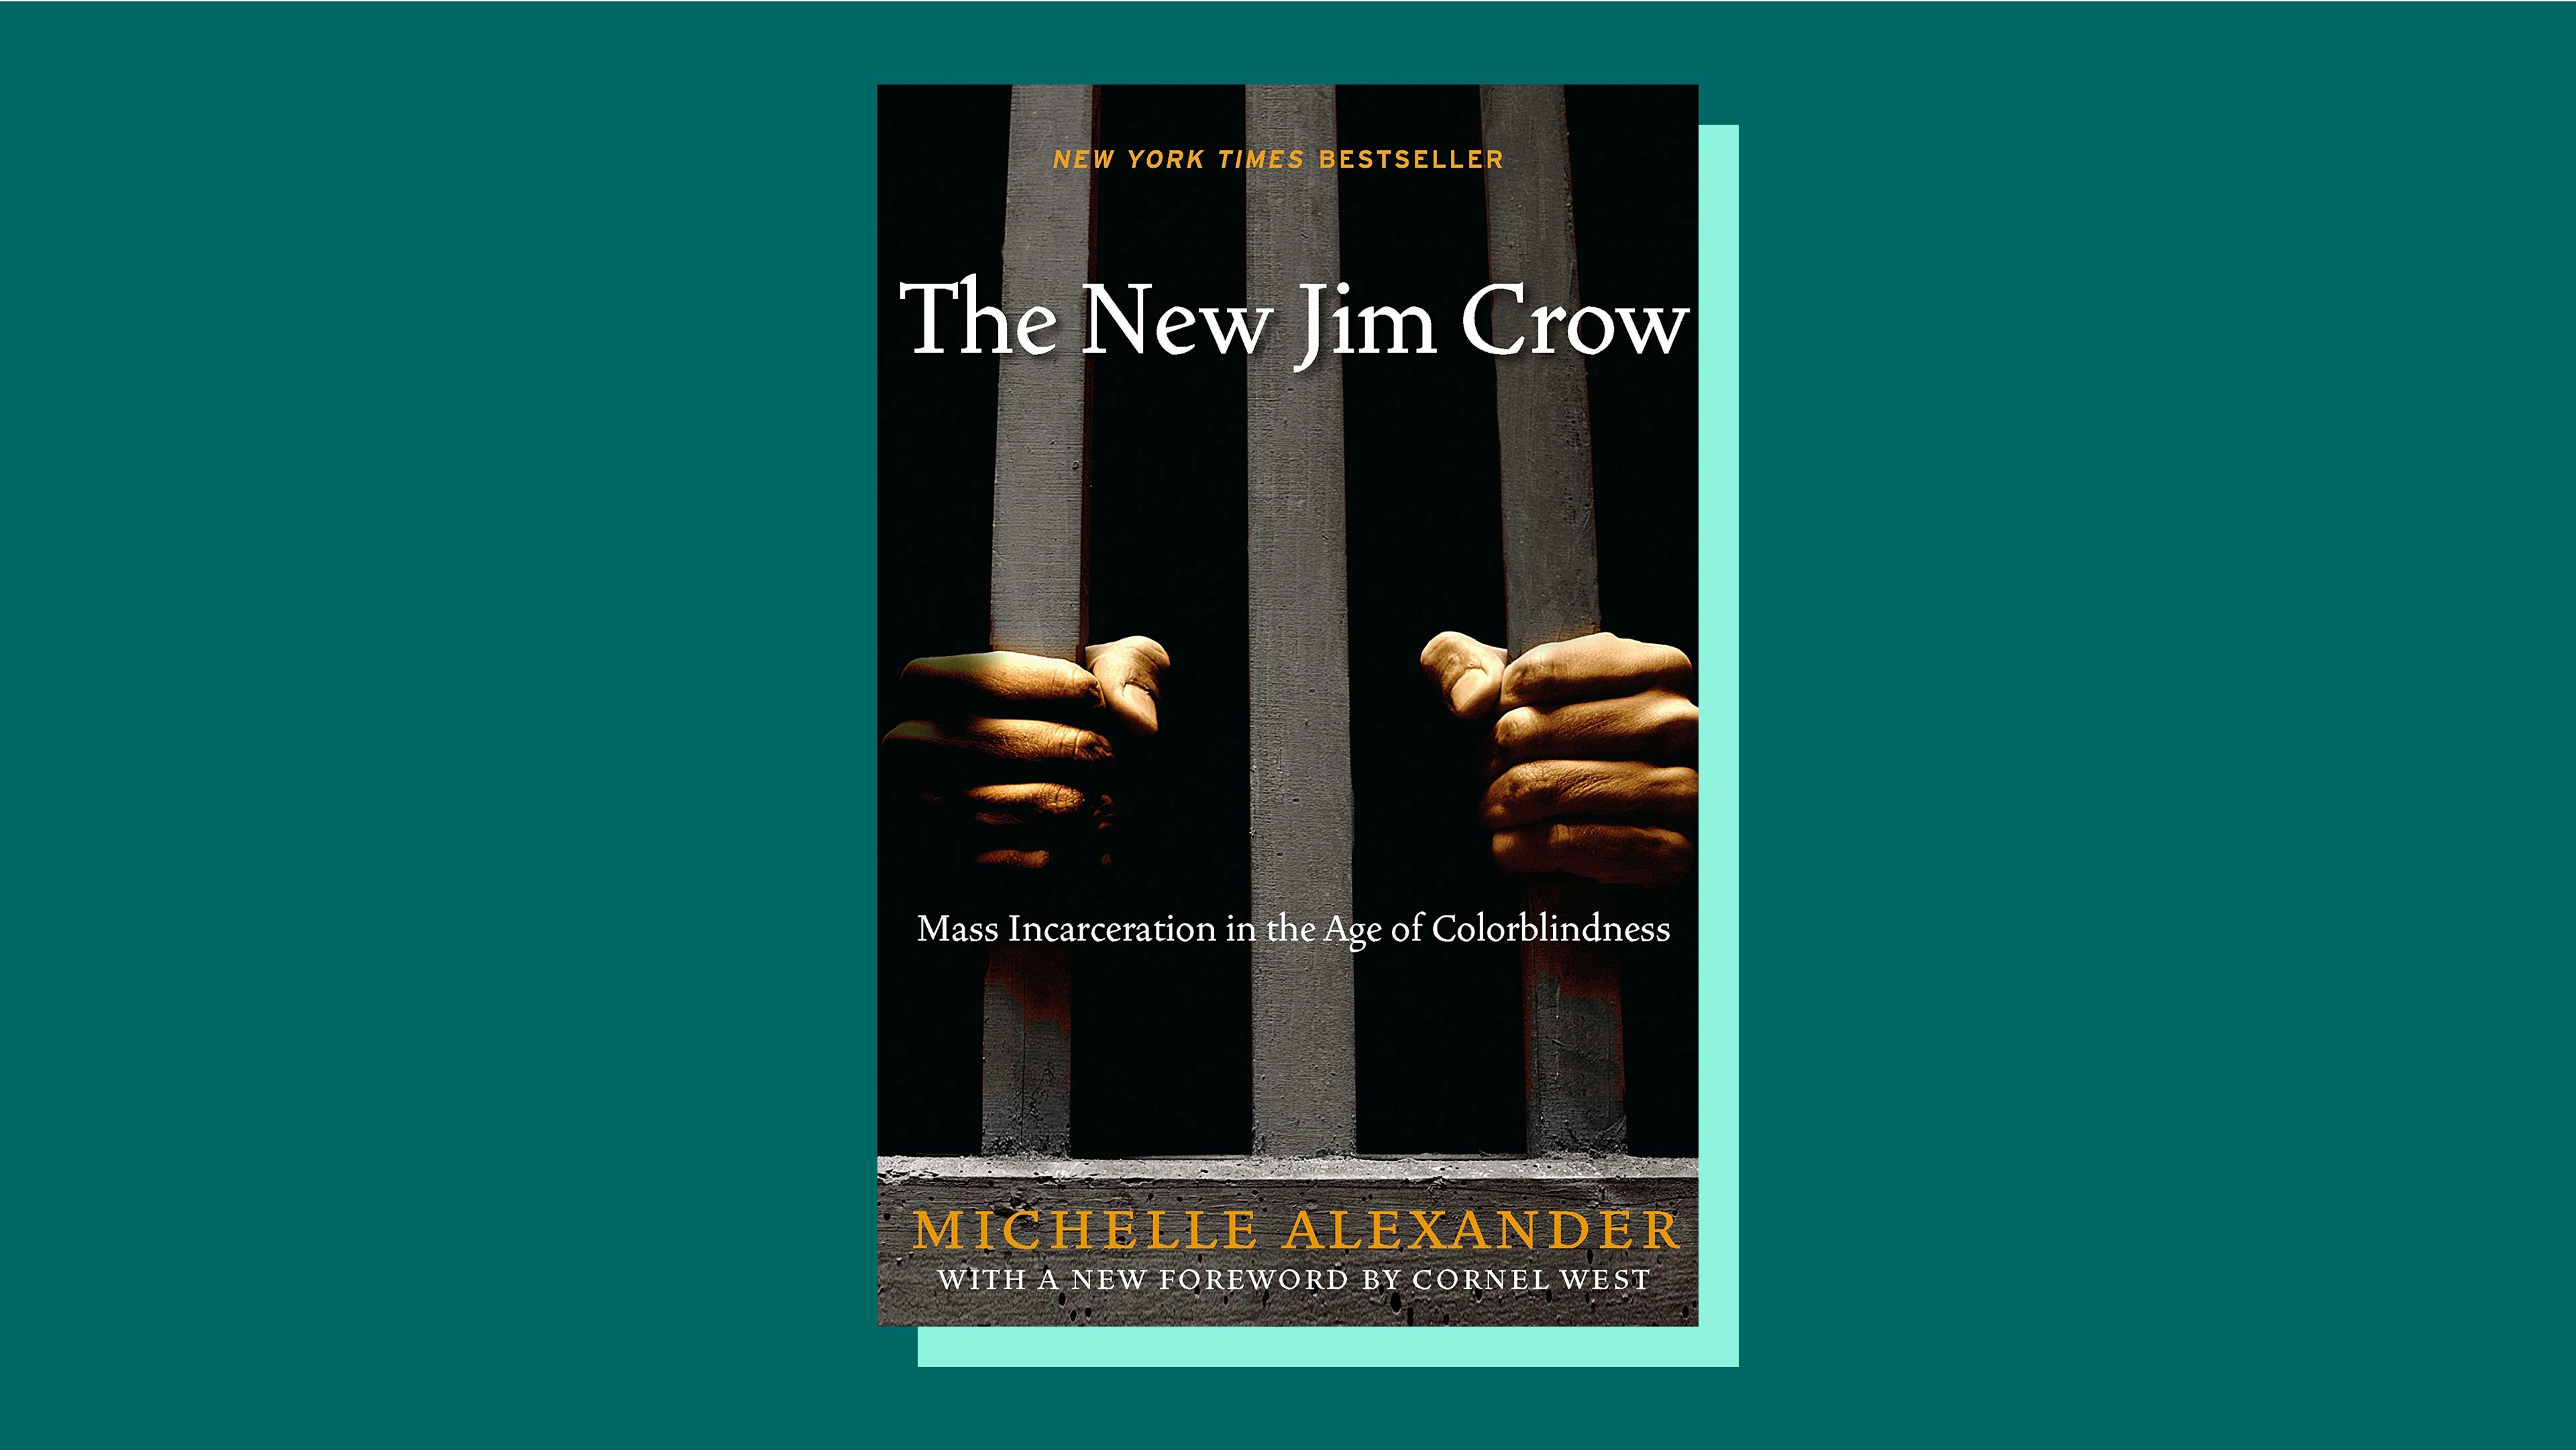 “The New Jim Crow: Mass Incarceration in the Age of Colorblindness” by Michelle Alexander 